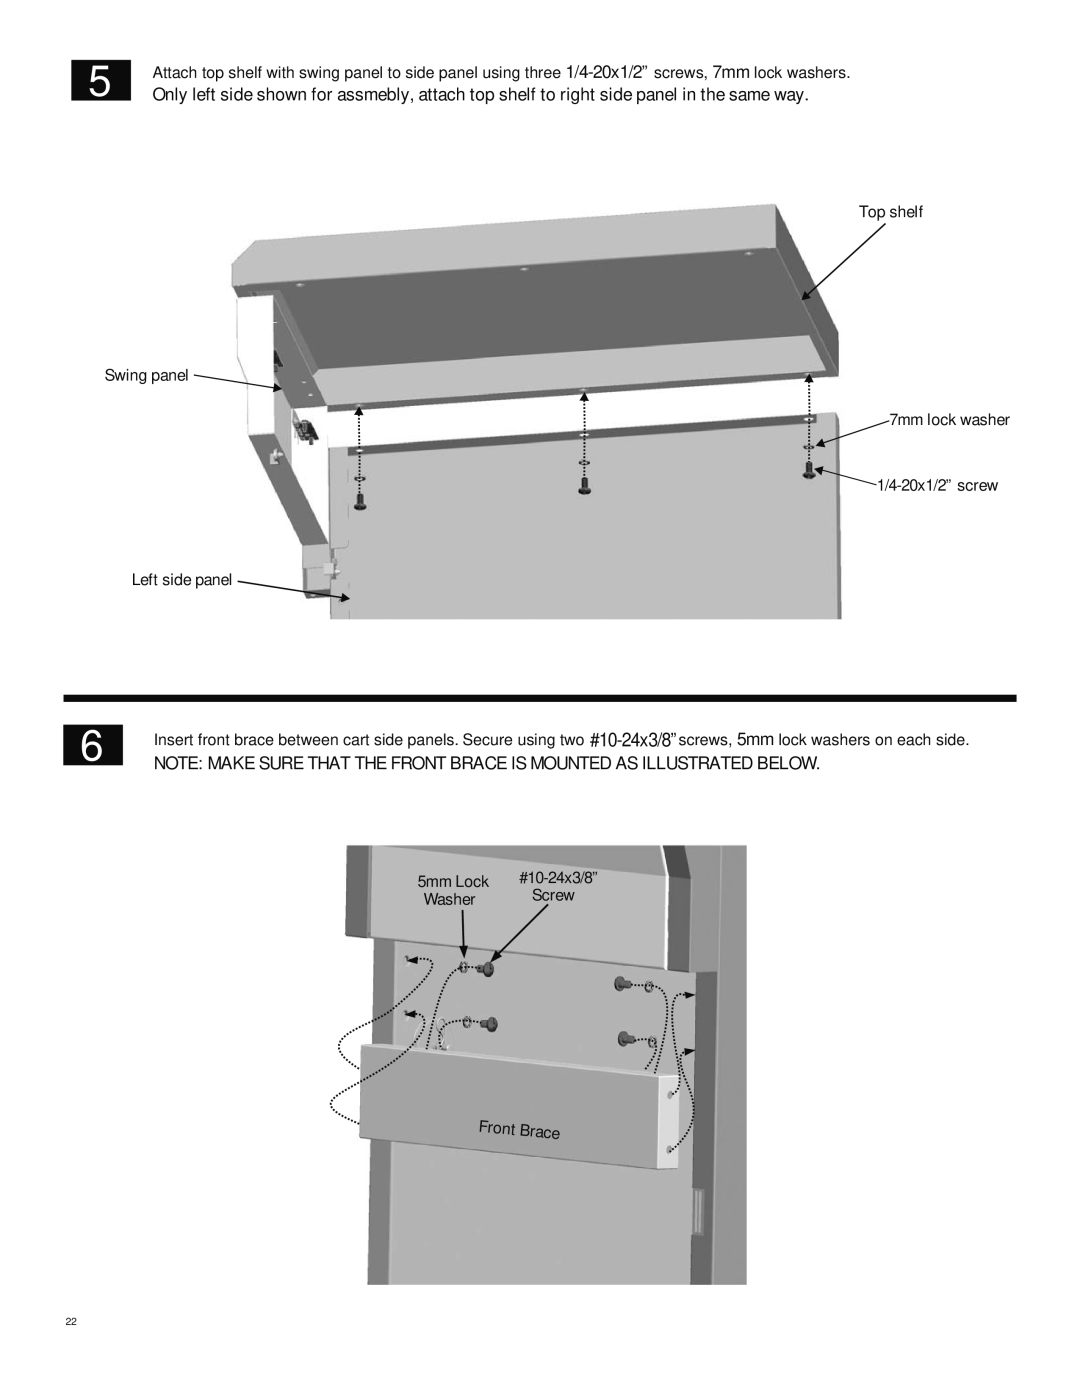 Char-Broil 463269411 Note Make Sure That The Front Brace Is Mounted As Illustrated Below, Left side panel, 5mm Lock, Screw 